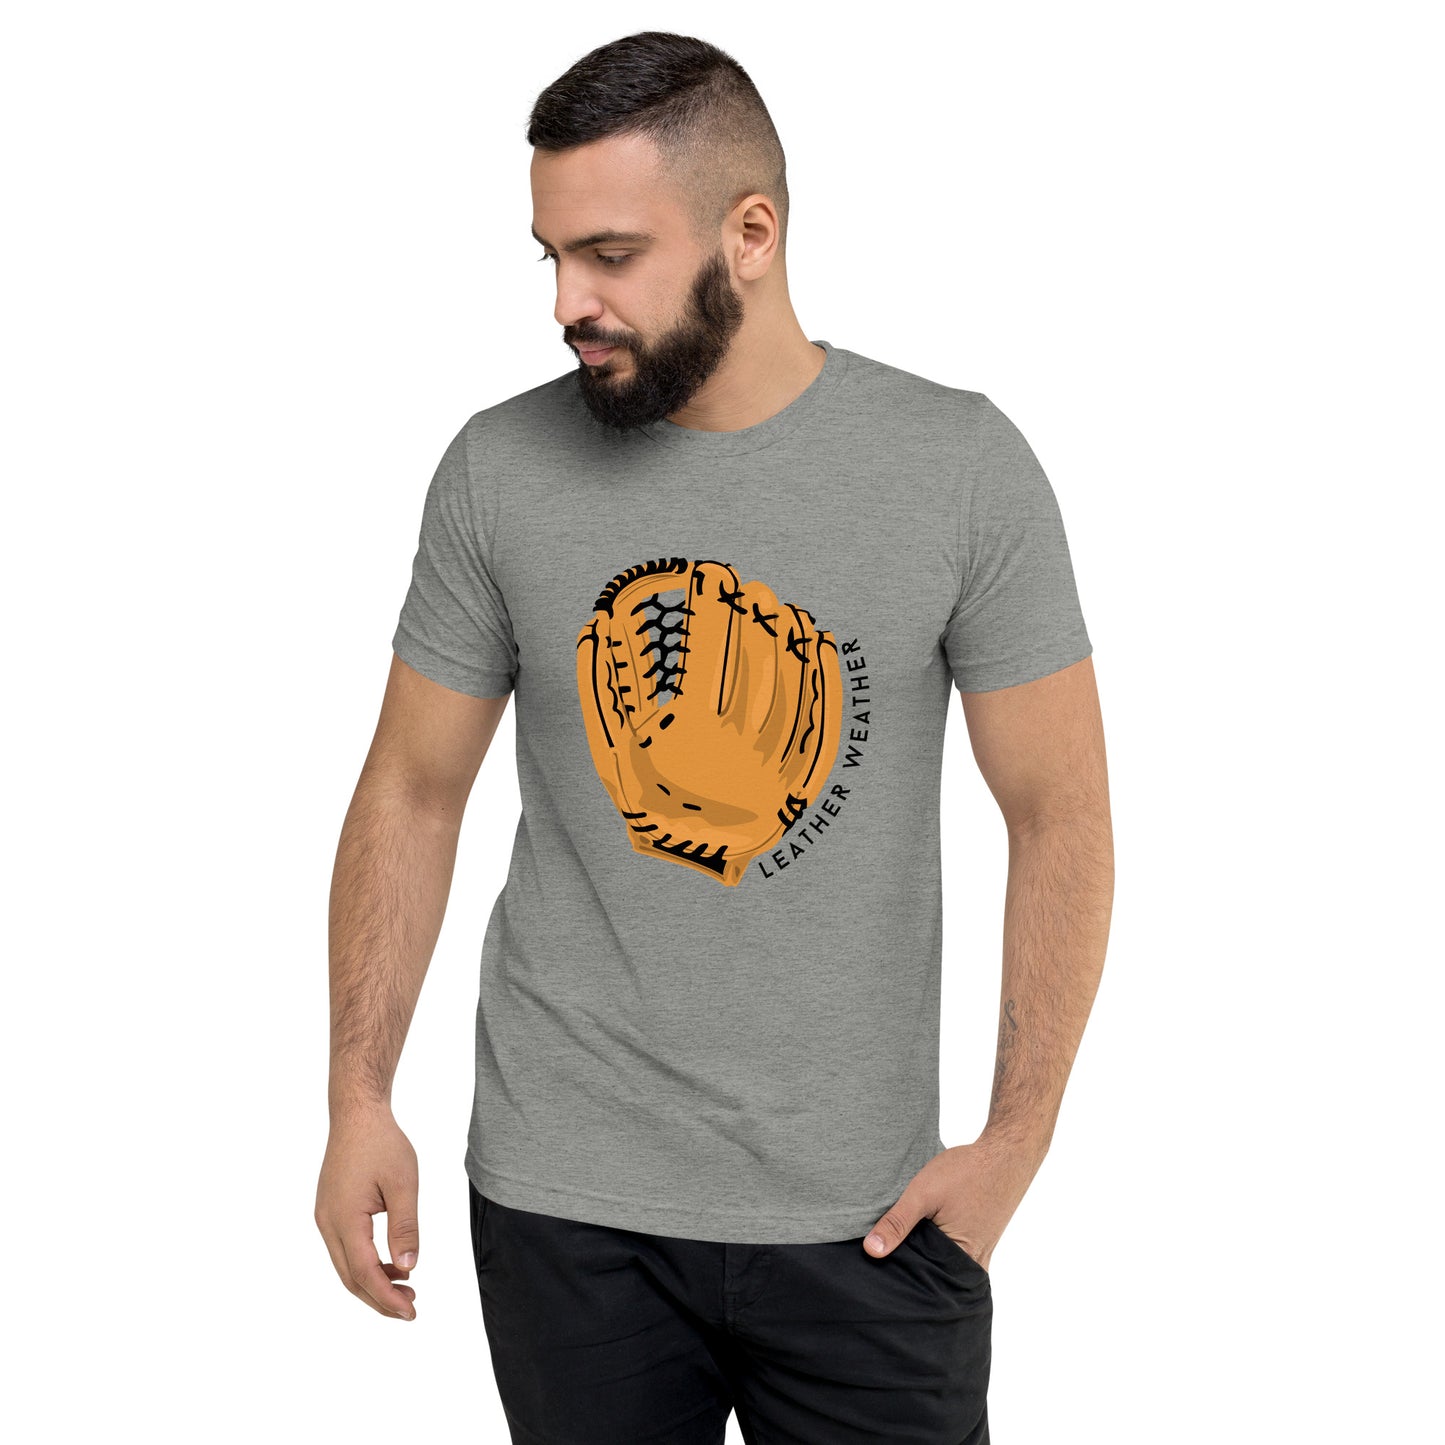 Leather Weather - Unisex Tri-Blend Tee